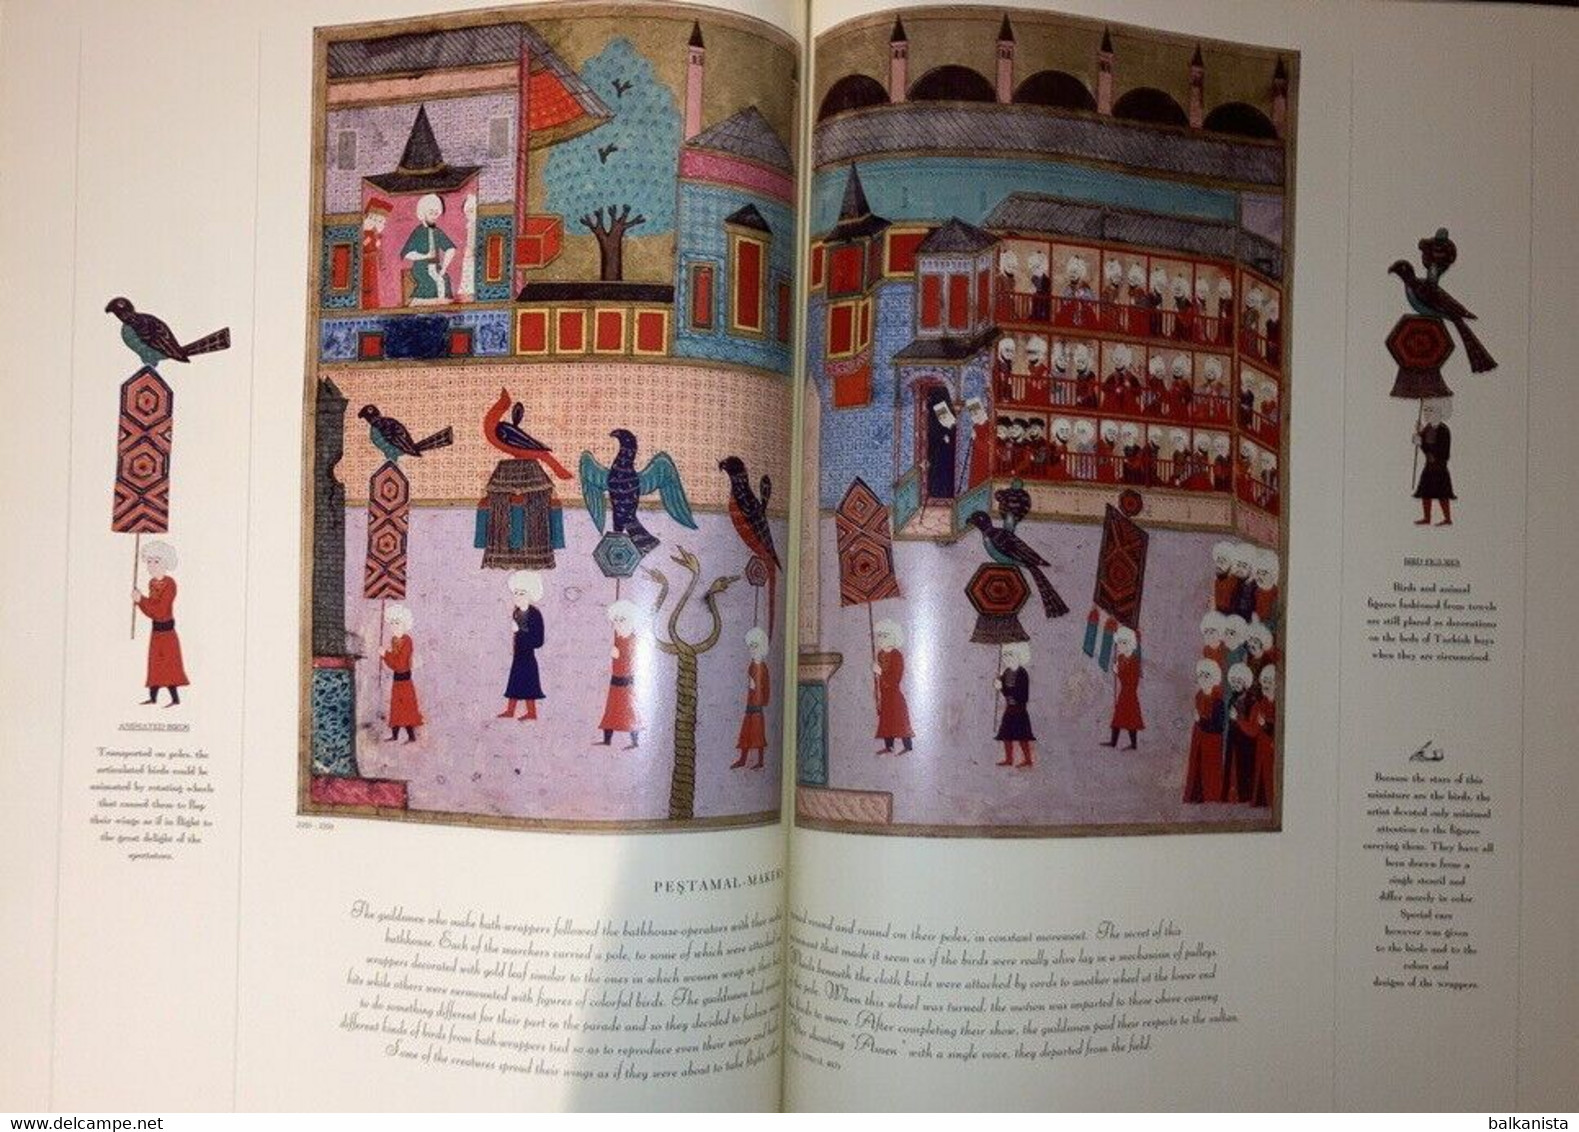 Surname-i Humayun 1582 An Imperial Celebration Illustrated Ottoman Festival Book - Culture